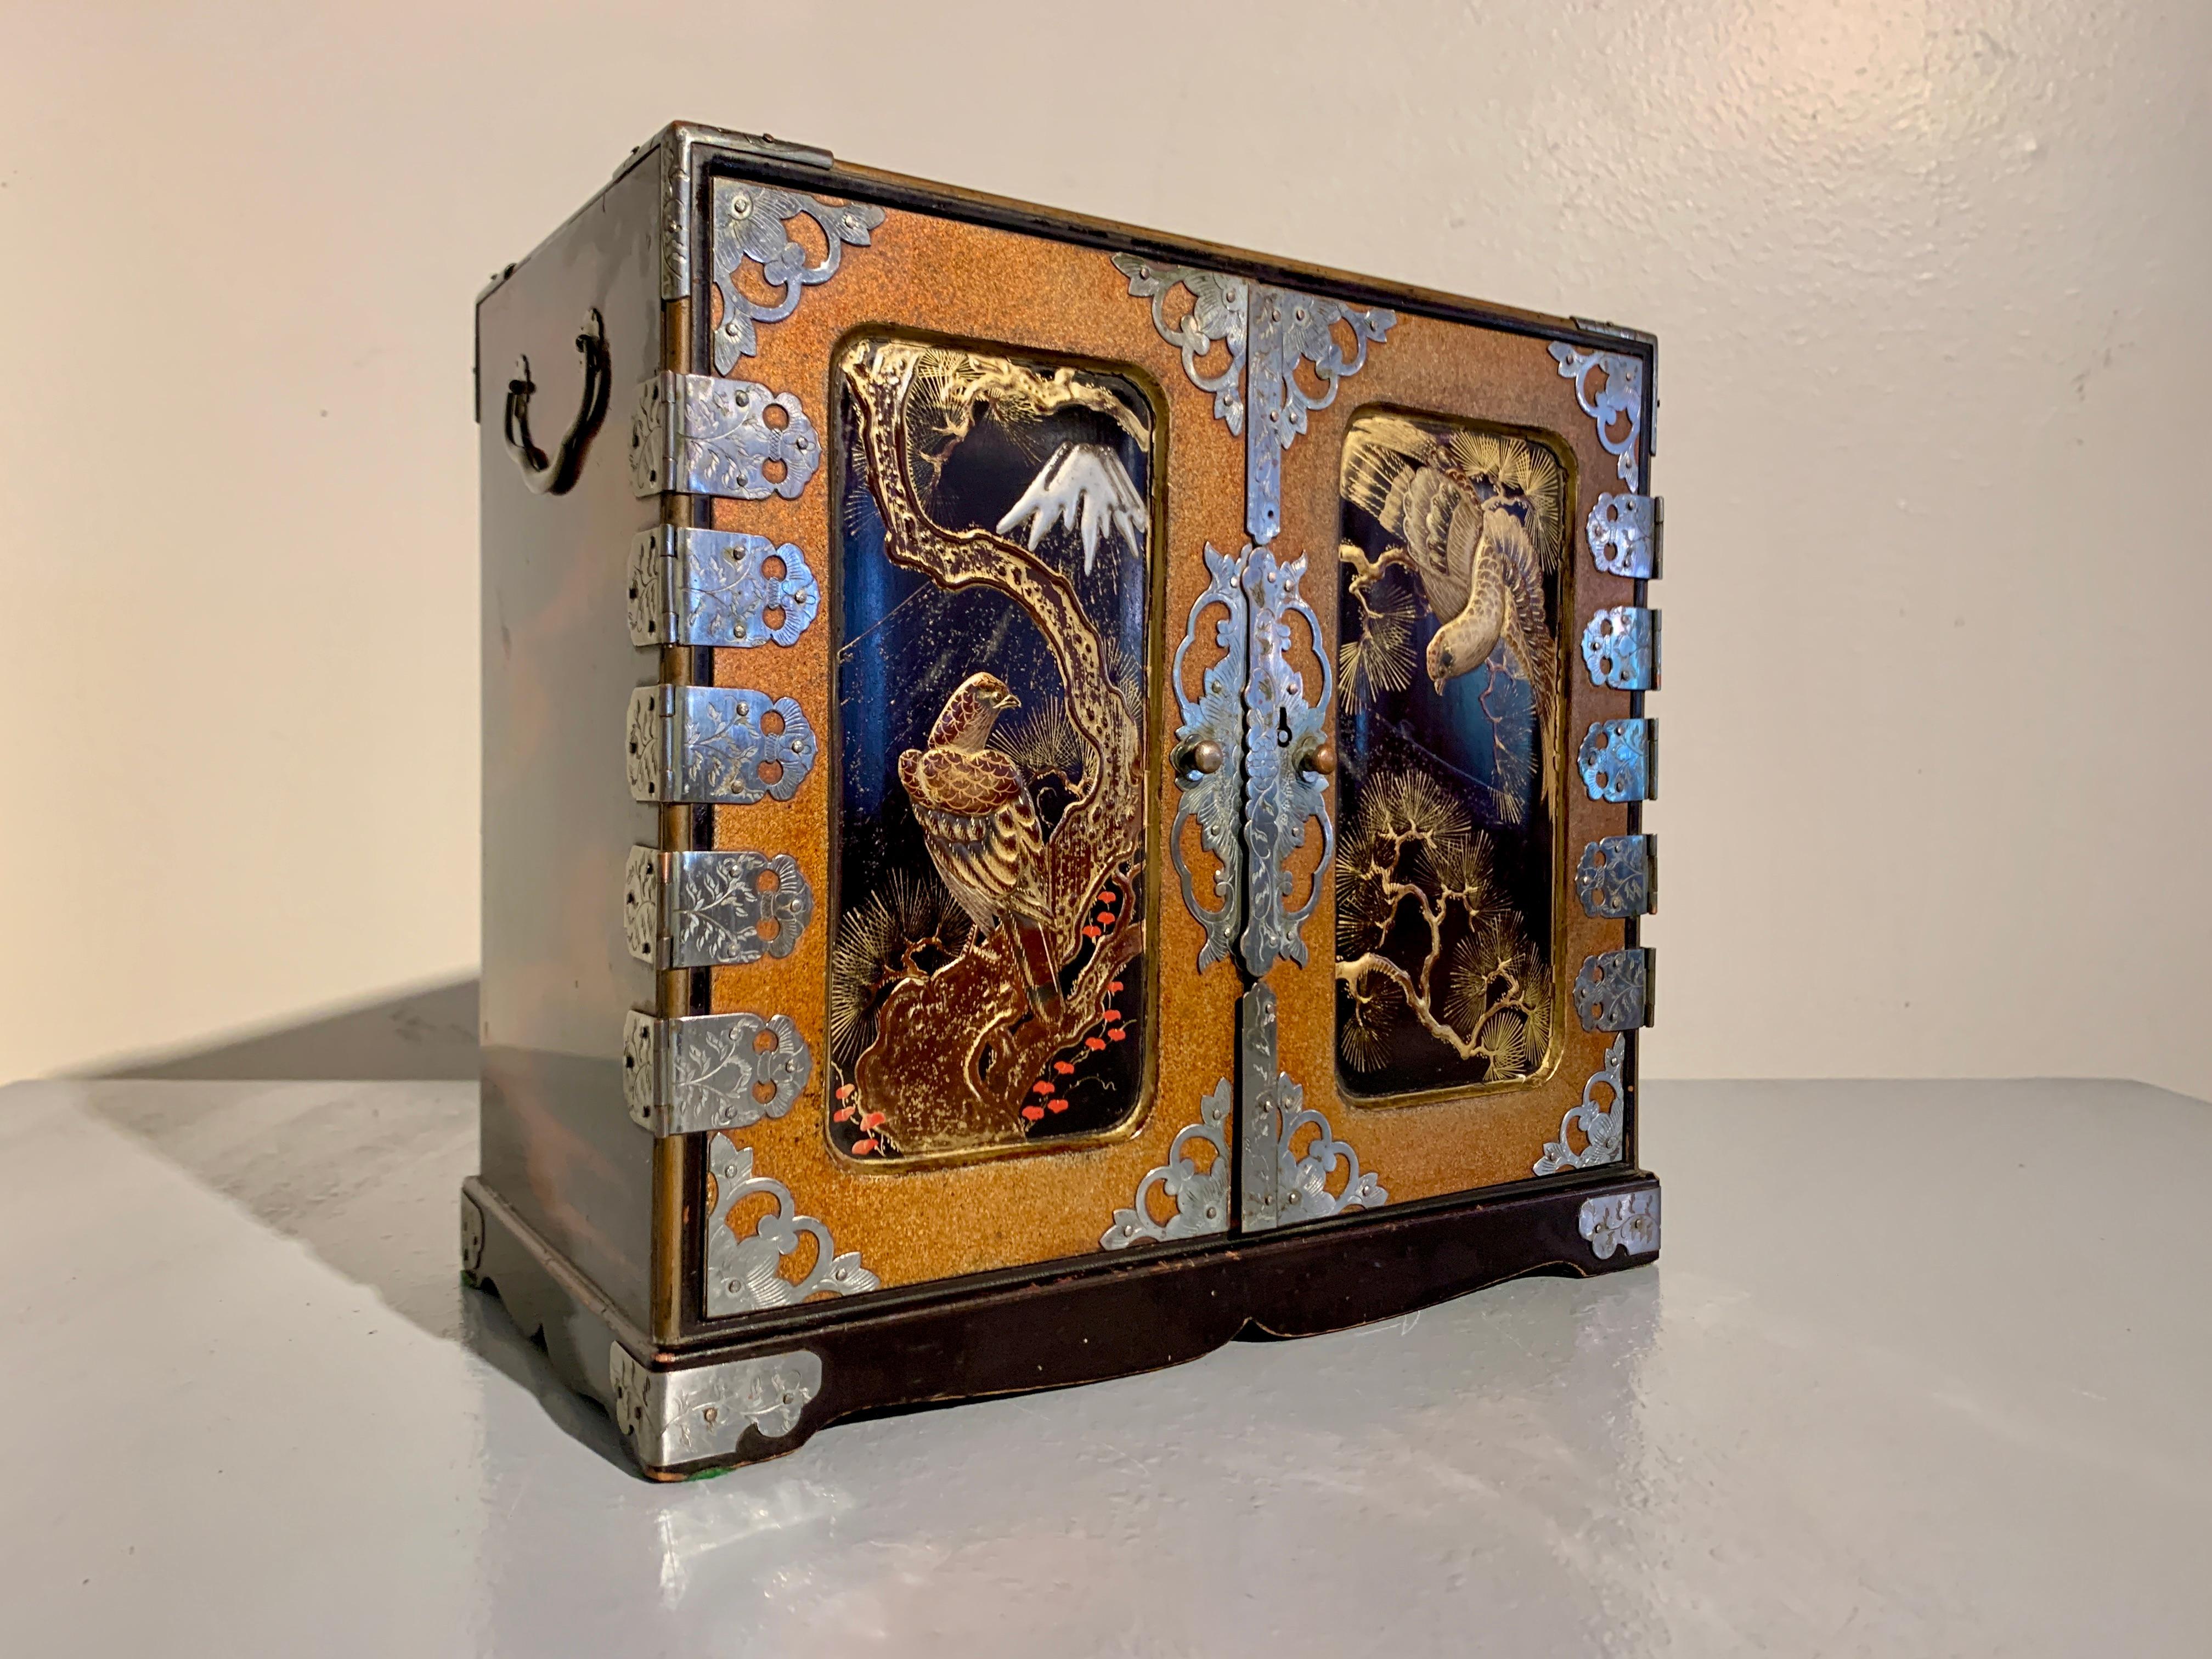 A delightful and powerful small Japanese lacquer table cabinet, suitable for use as a jewelry box or collector's chest, with a design of hawks, pine, and Mt. Fuji, Meiji Period, circa 1900, Japan.

The small chest or cabinet of traditional form, set